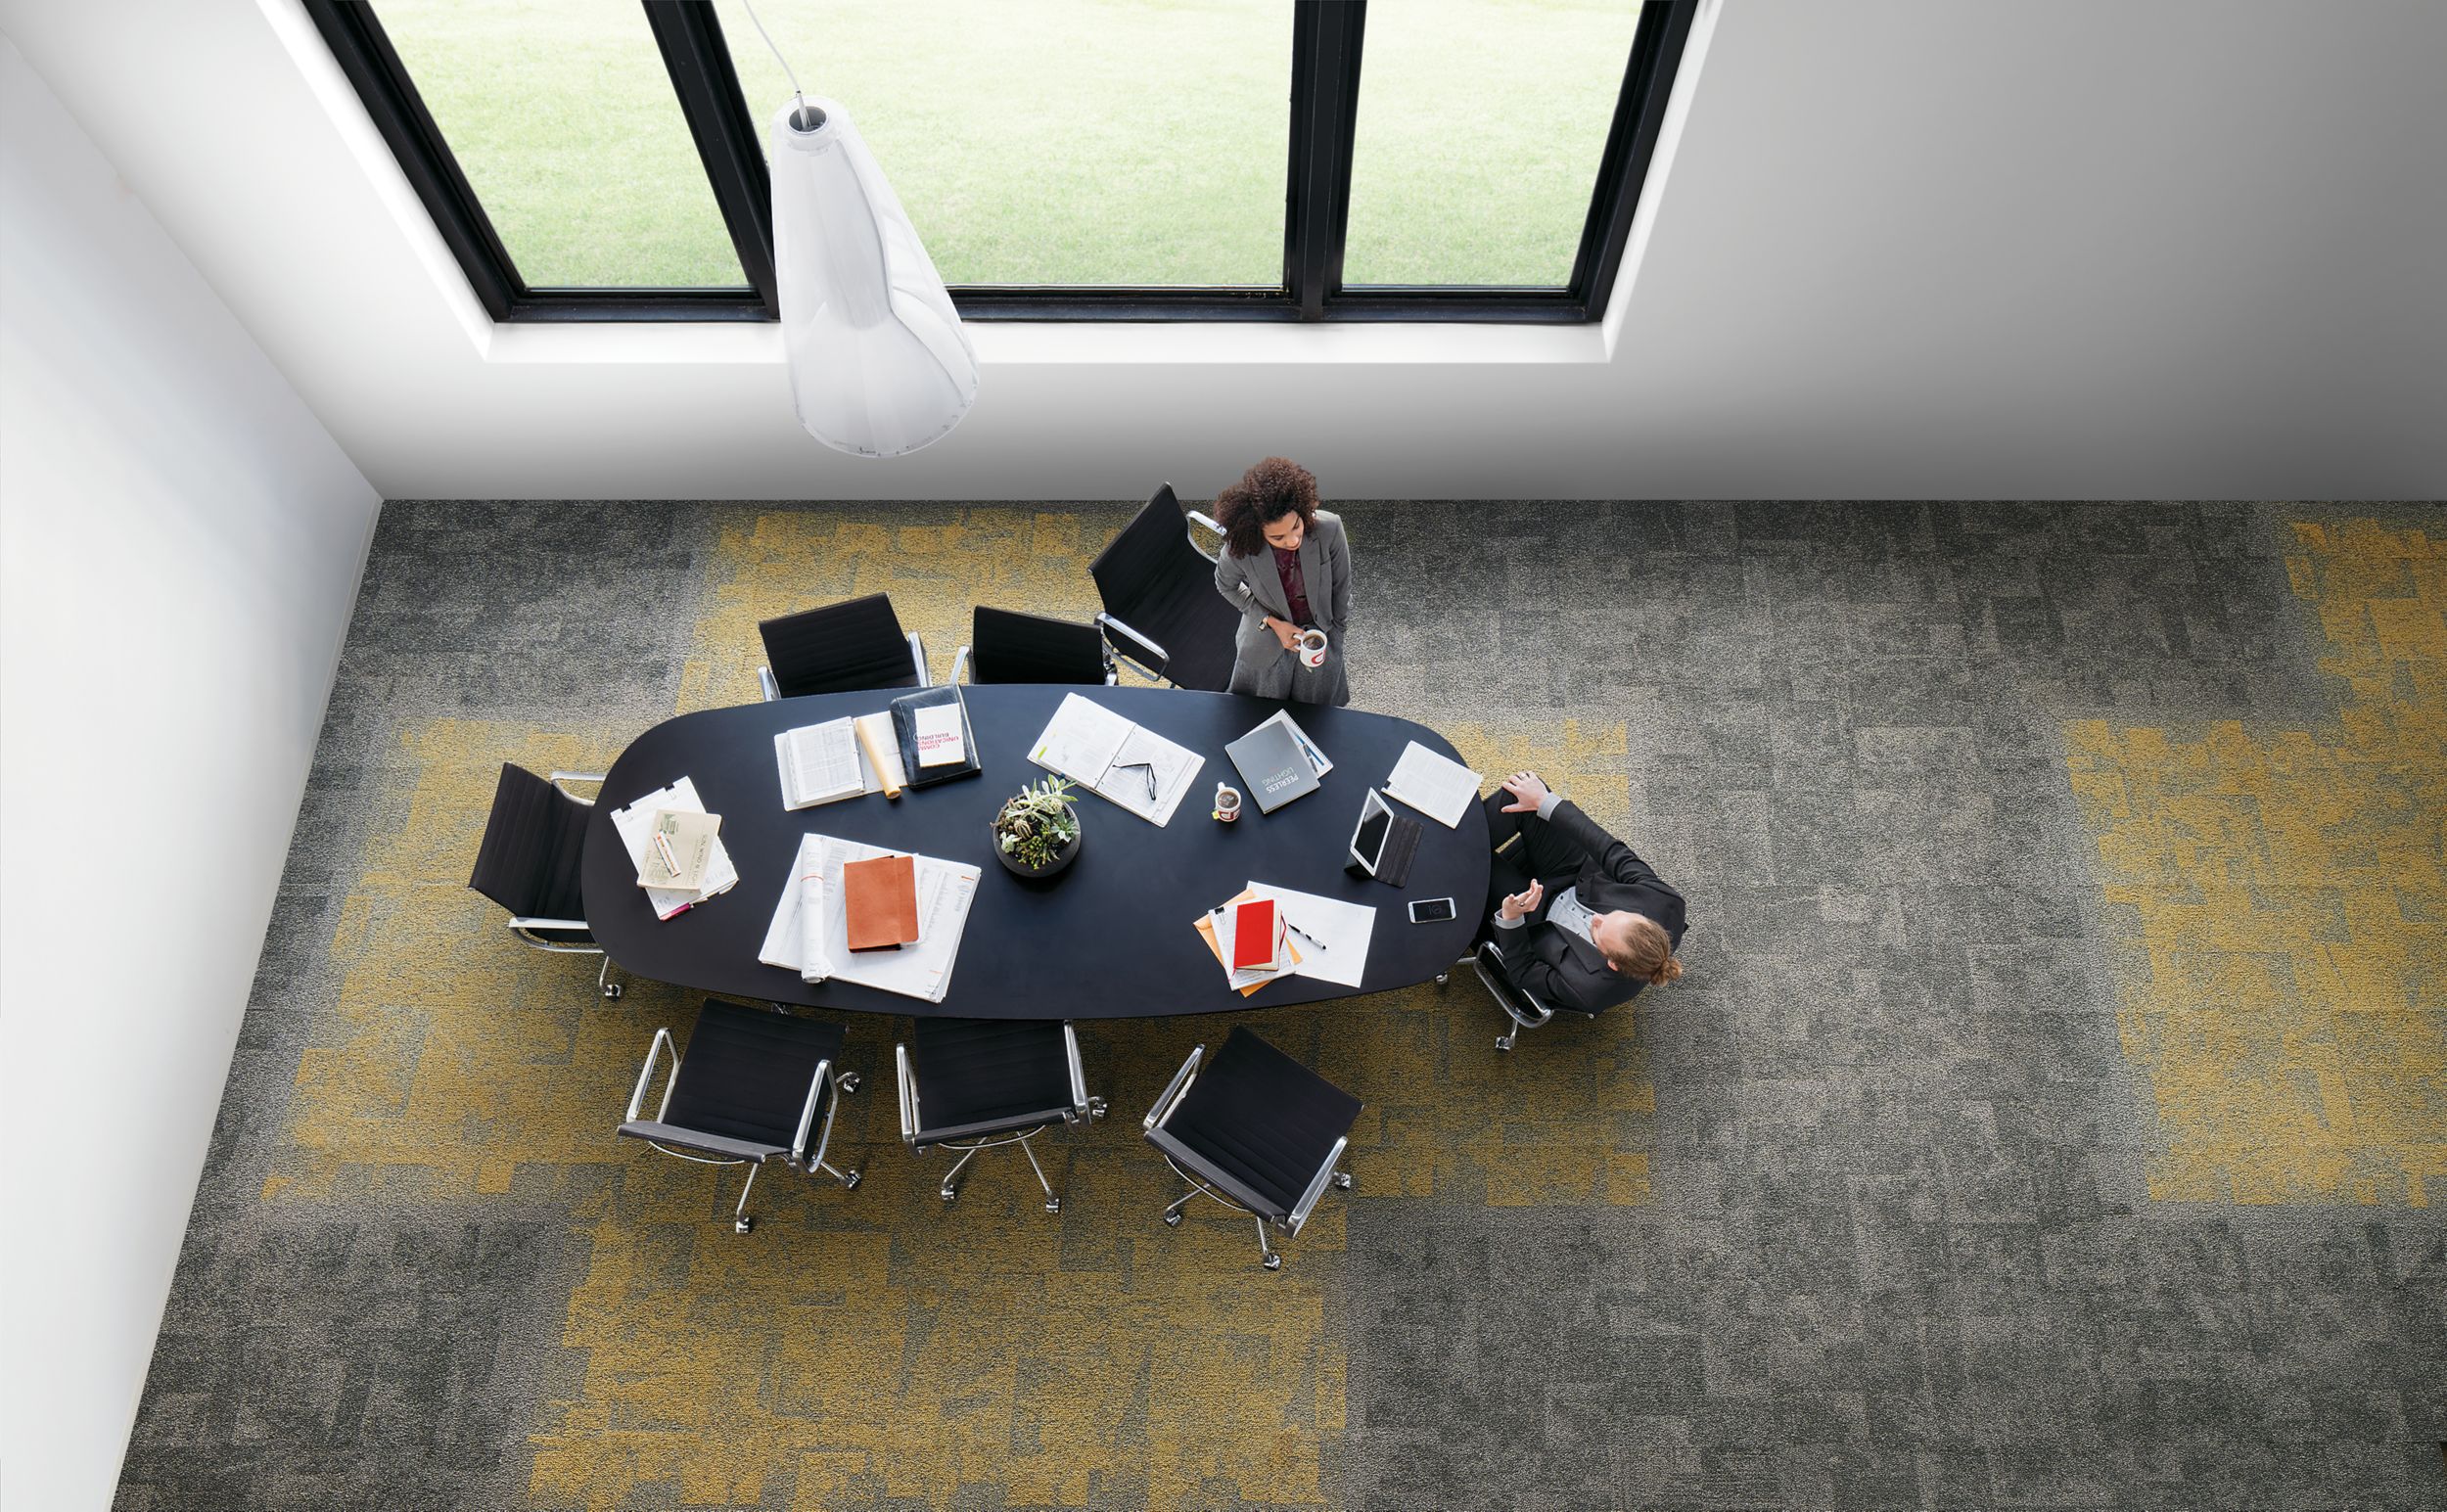 Interface Open Air 404 carpet tile in overhead view of meeting table with man and woman talking and drinking coffee número de imagen 3